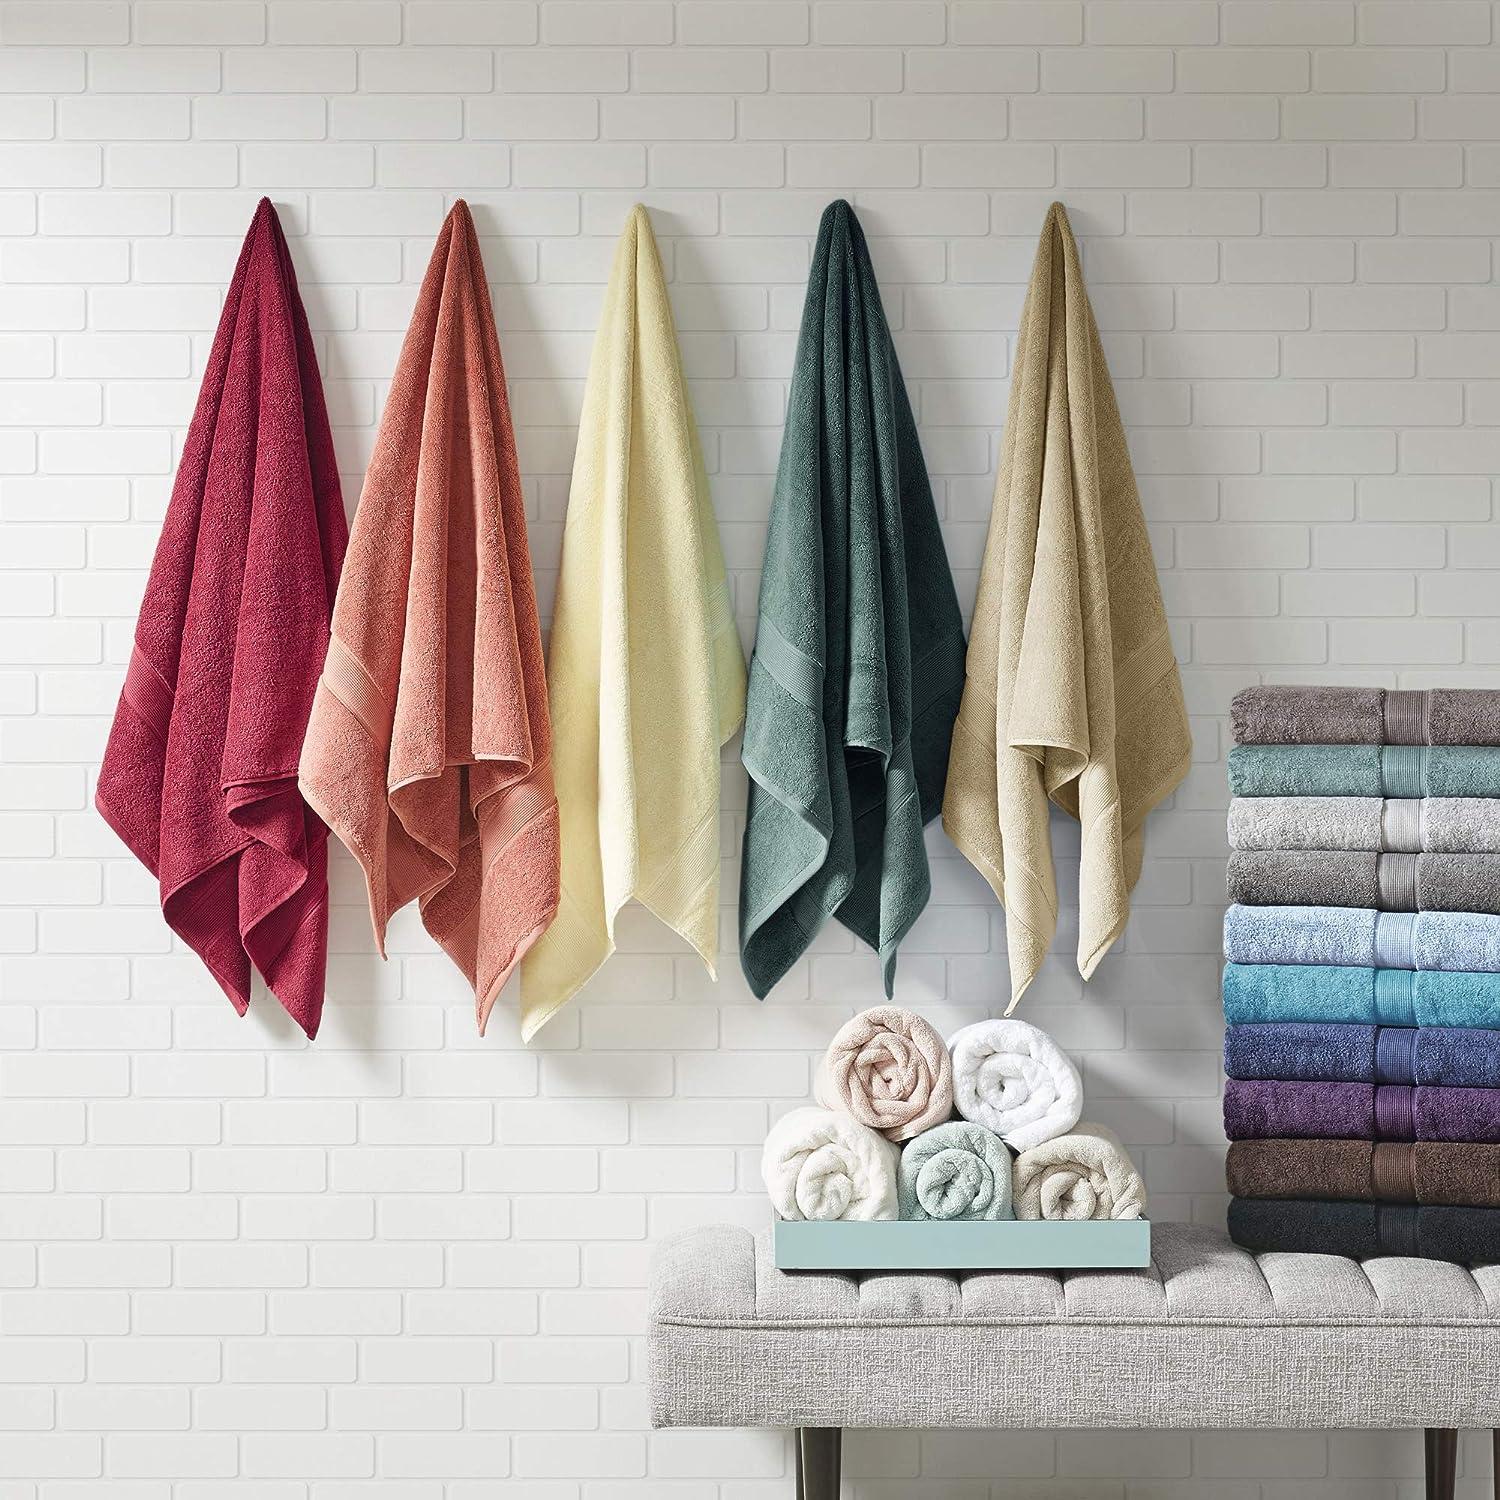 Bathroom Hand Towels, Luxury Natural Cotton